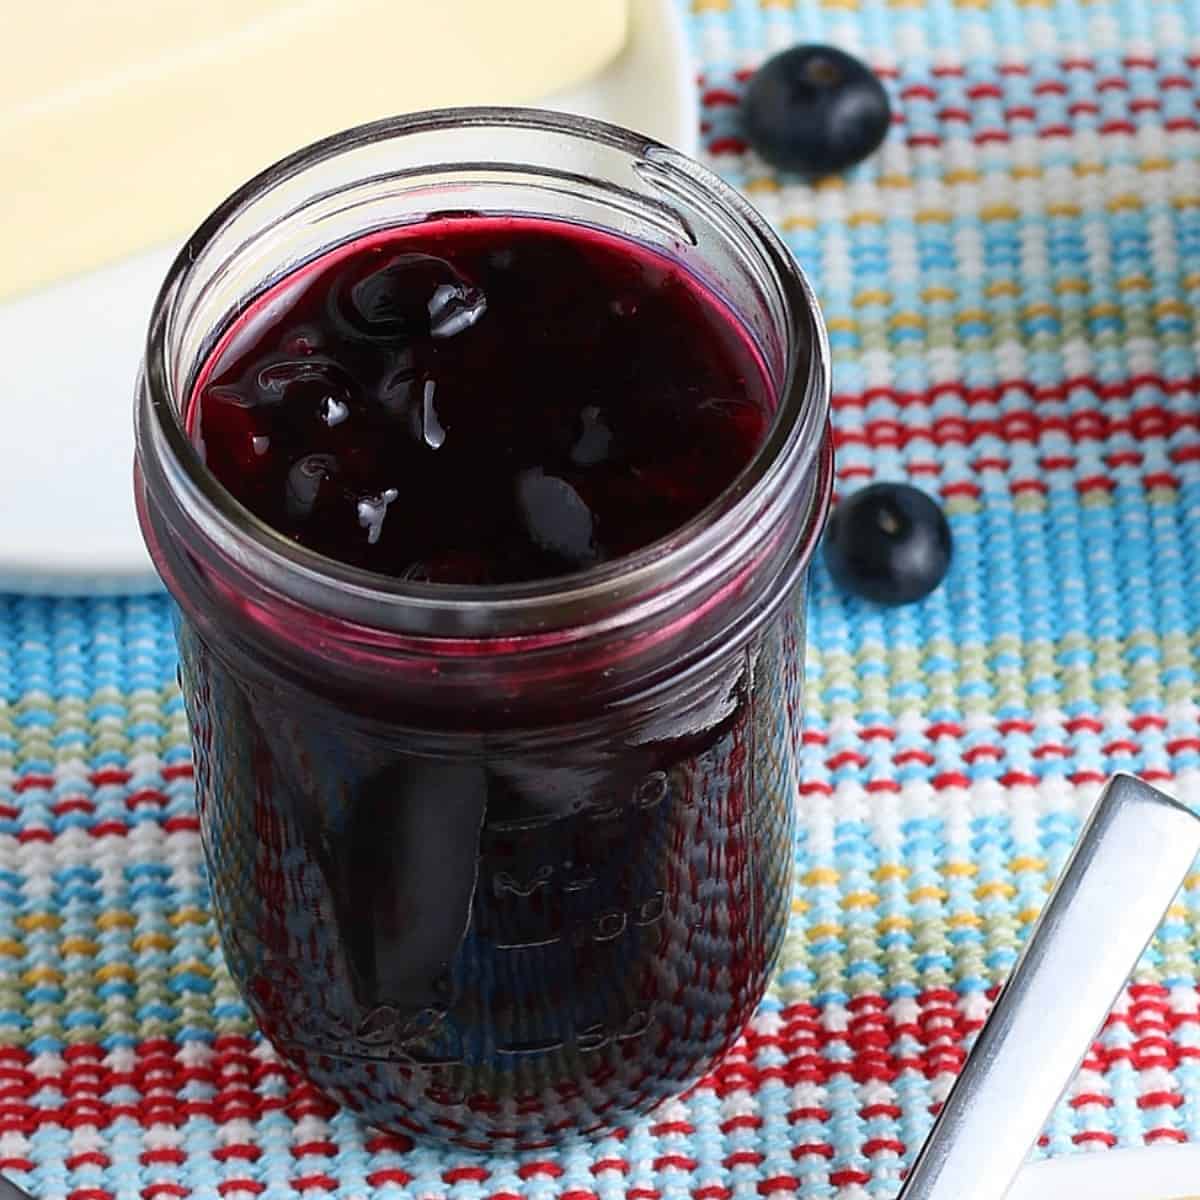 A pint jar filled with a cooked fruit condiment.